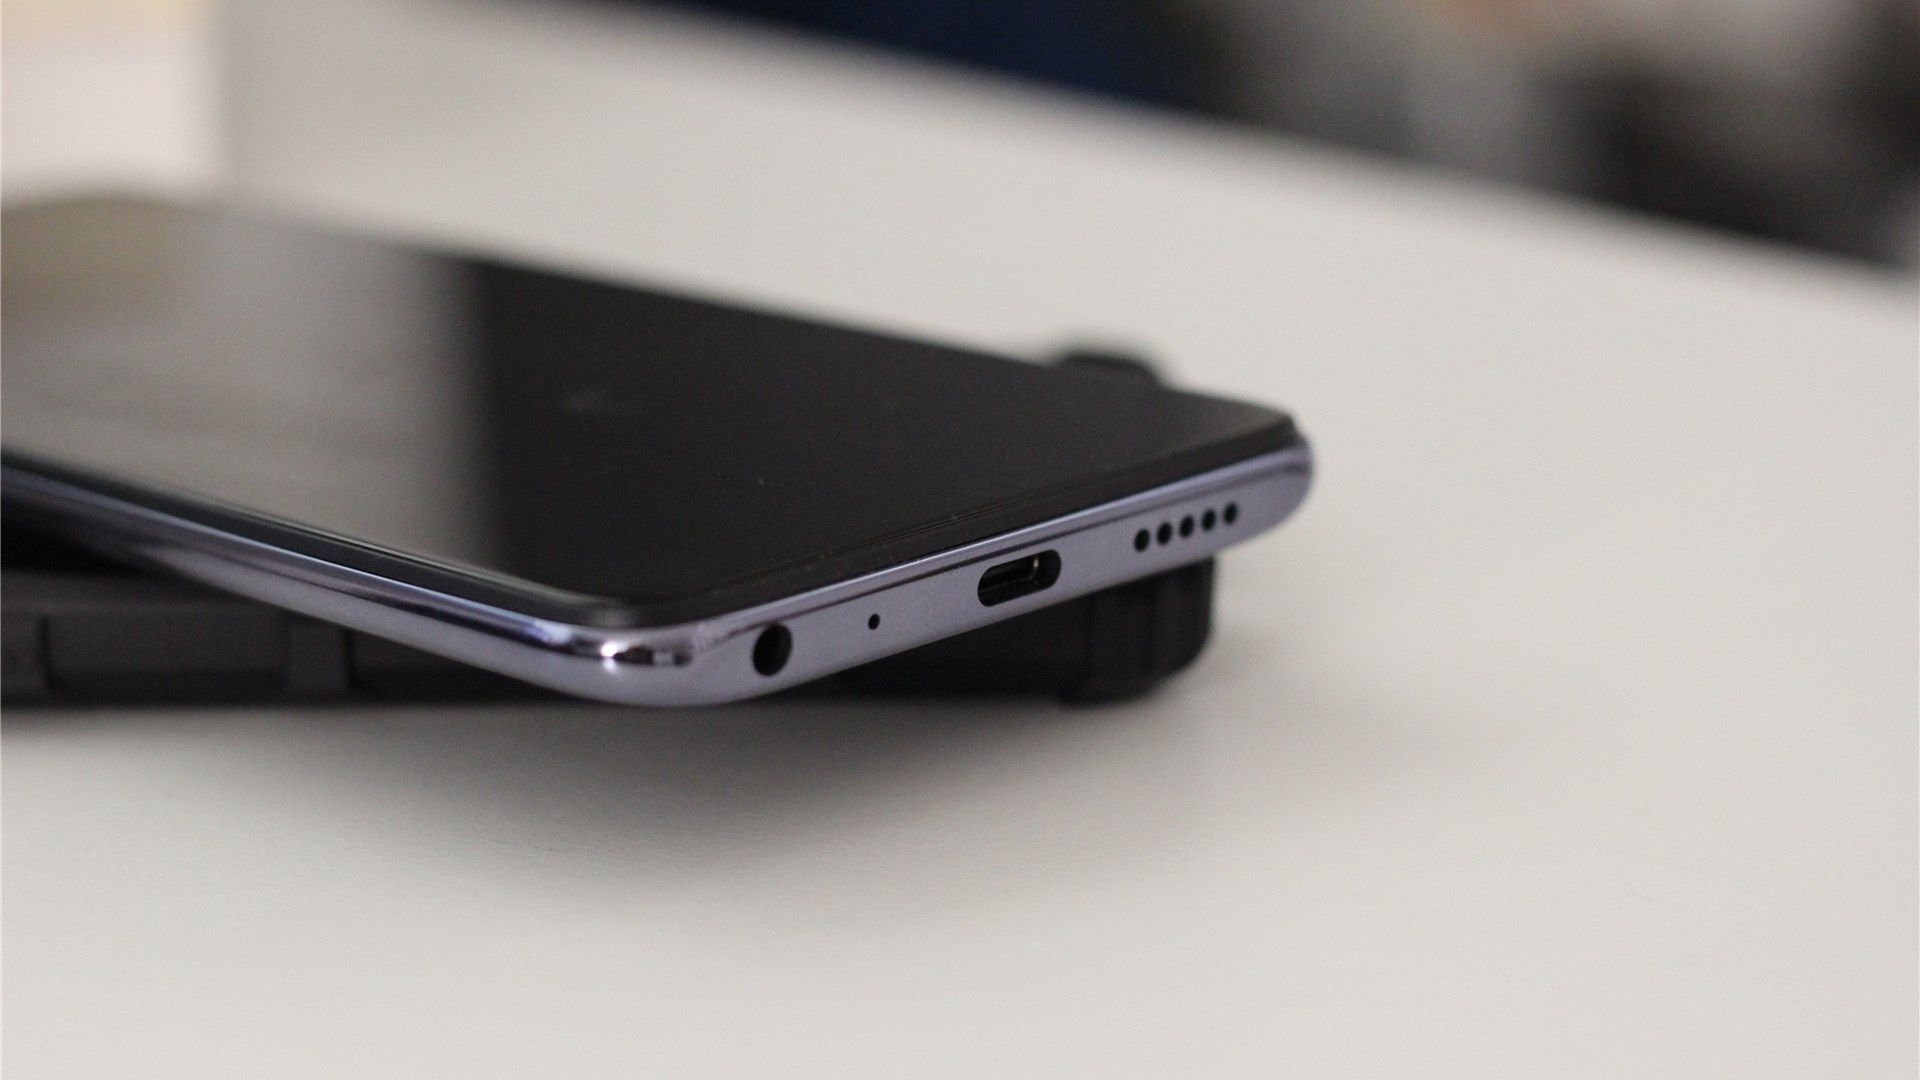 The headphone jack and USB-C port on the G91 Pro